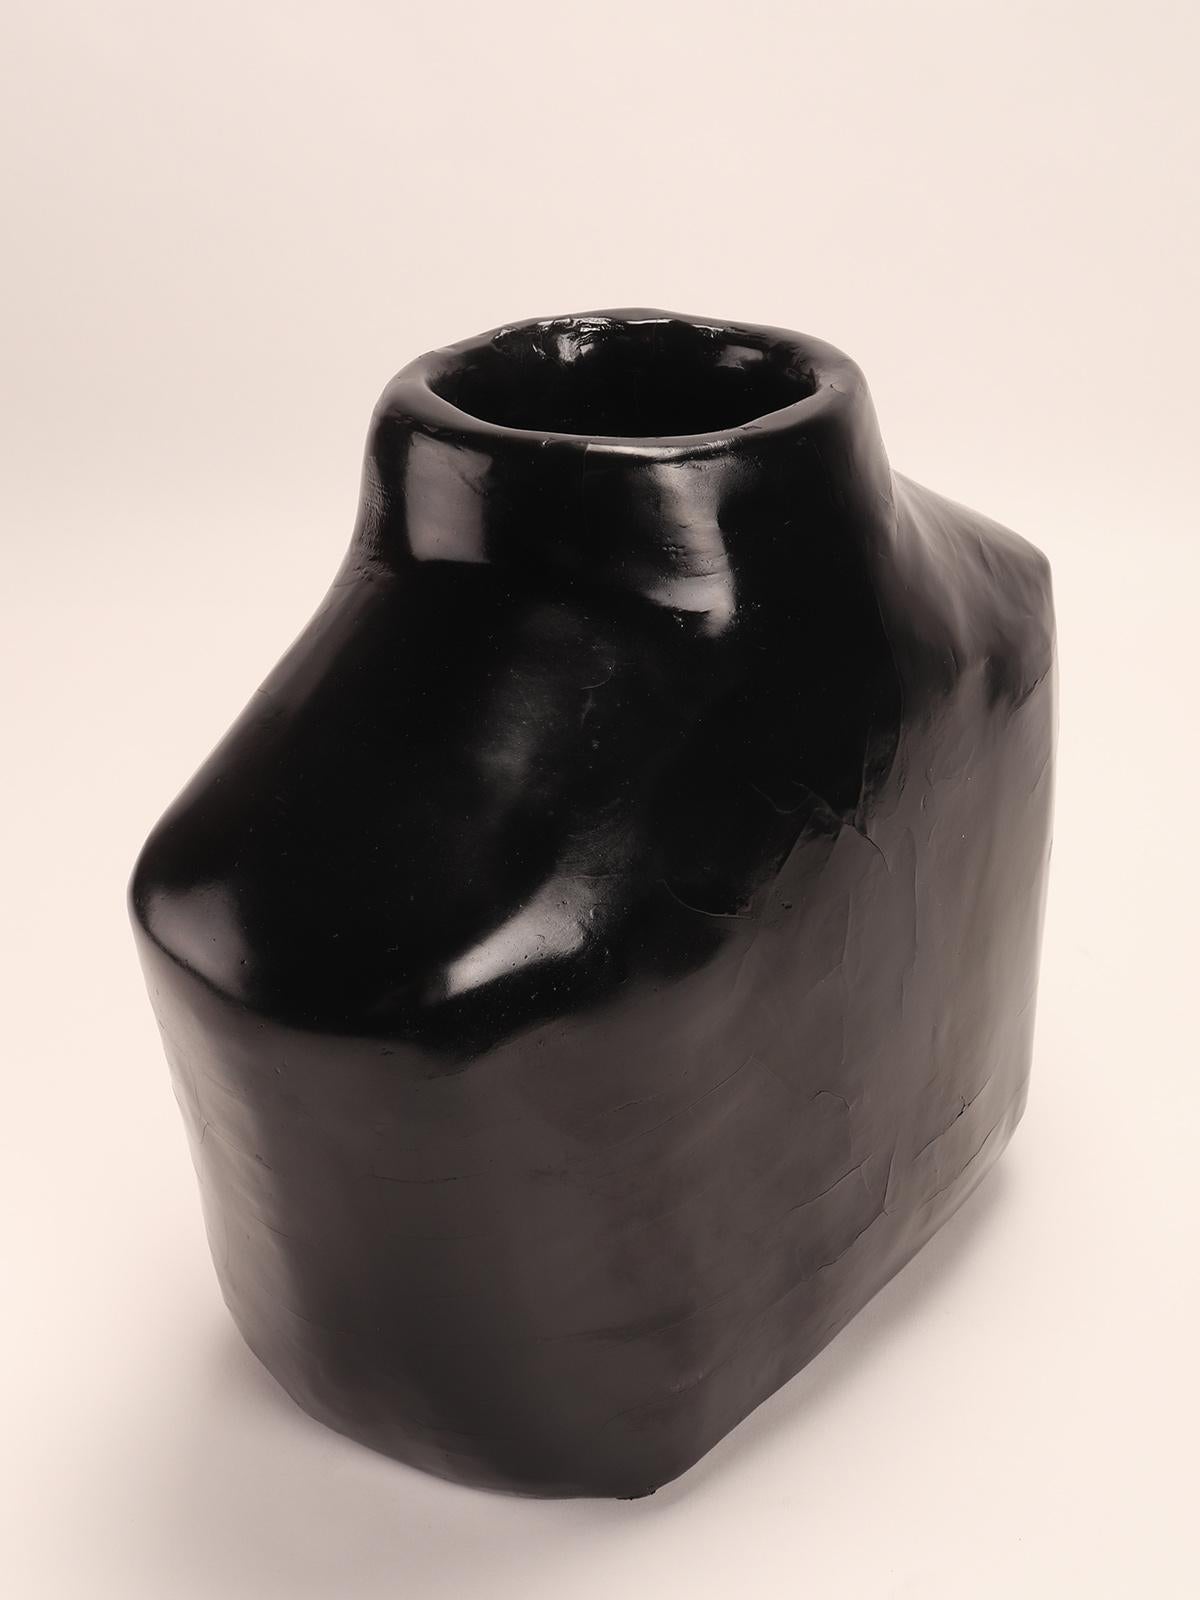 Clay Small oblong-shaped lacquer vase, Shanxi, China late 19th century. For Sale